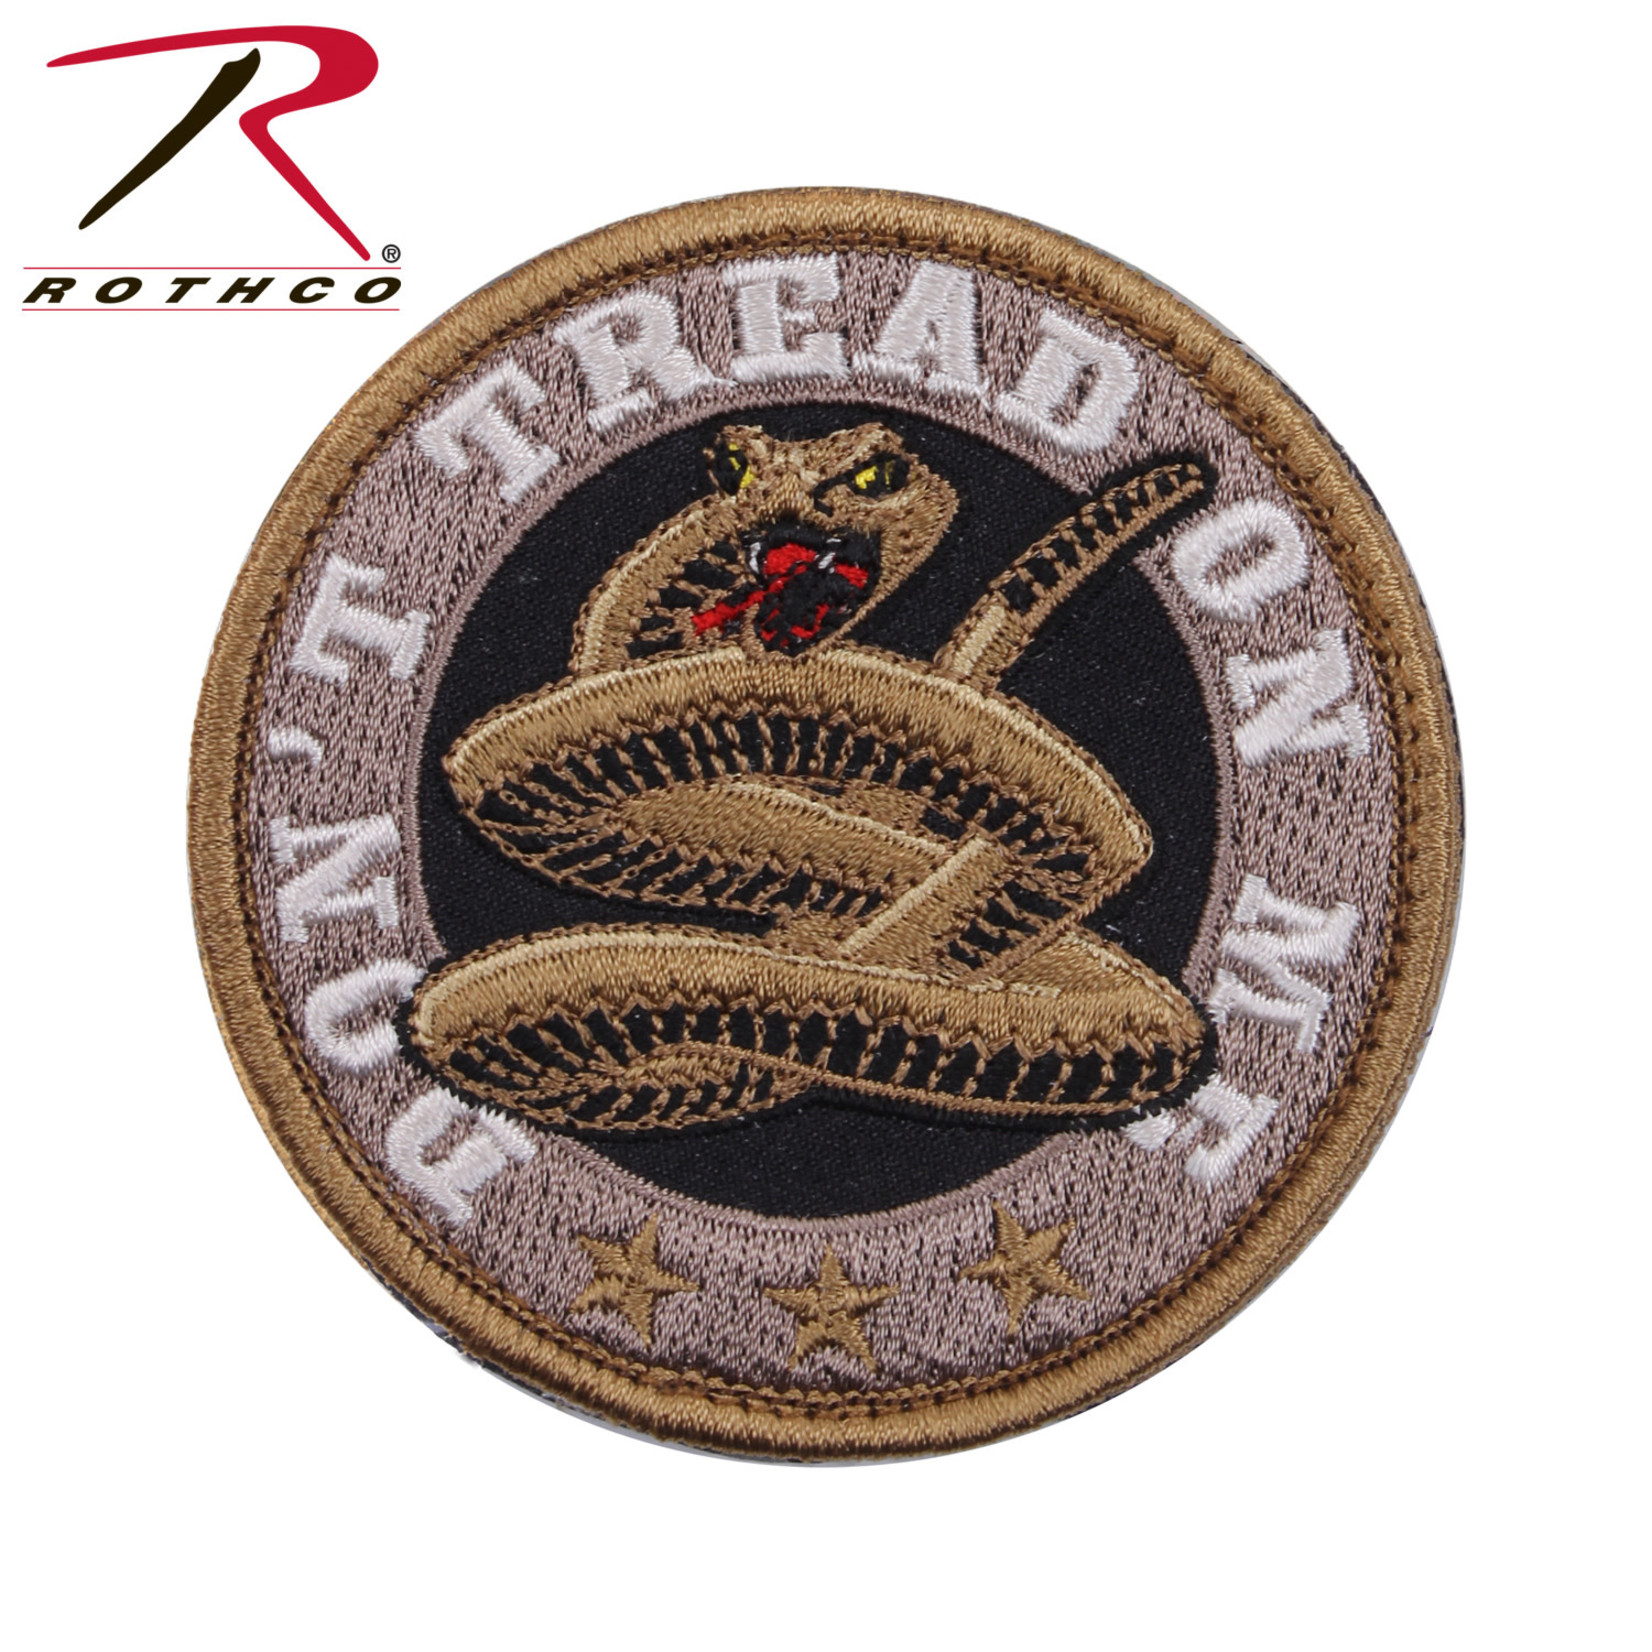 Rothco Don't Tread Snake Round Morale Patch